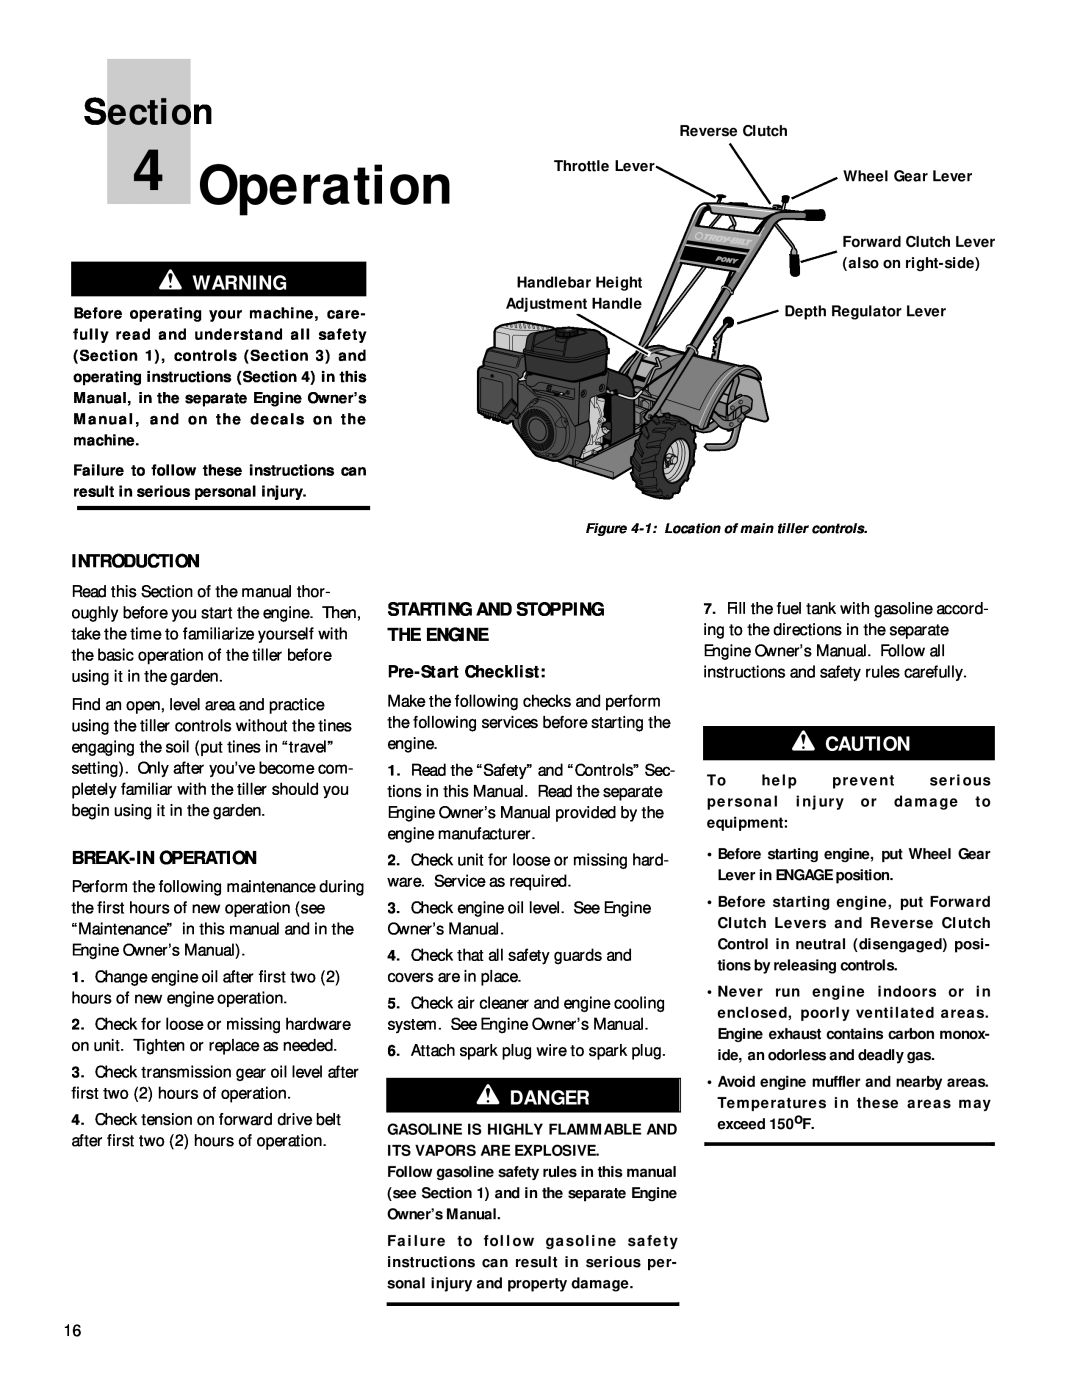 Troy-Bilt 12212 Introduction, Break-In Operation, Starting And Stopping The Engine, Pre-Start Checklist, Section 